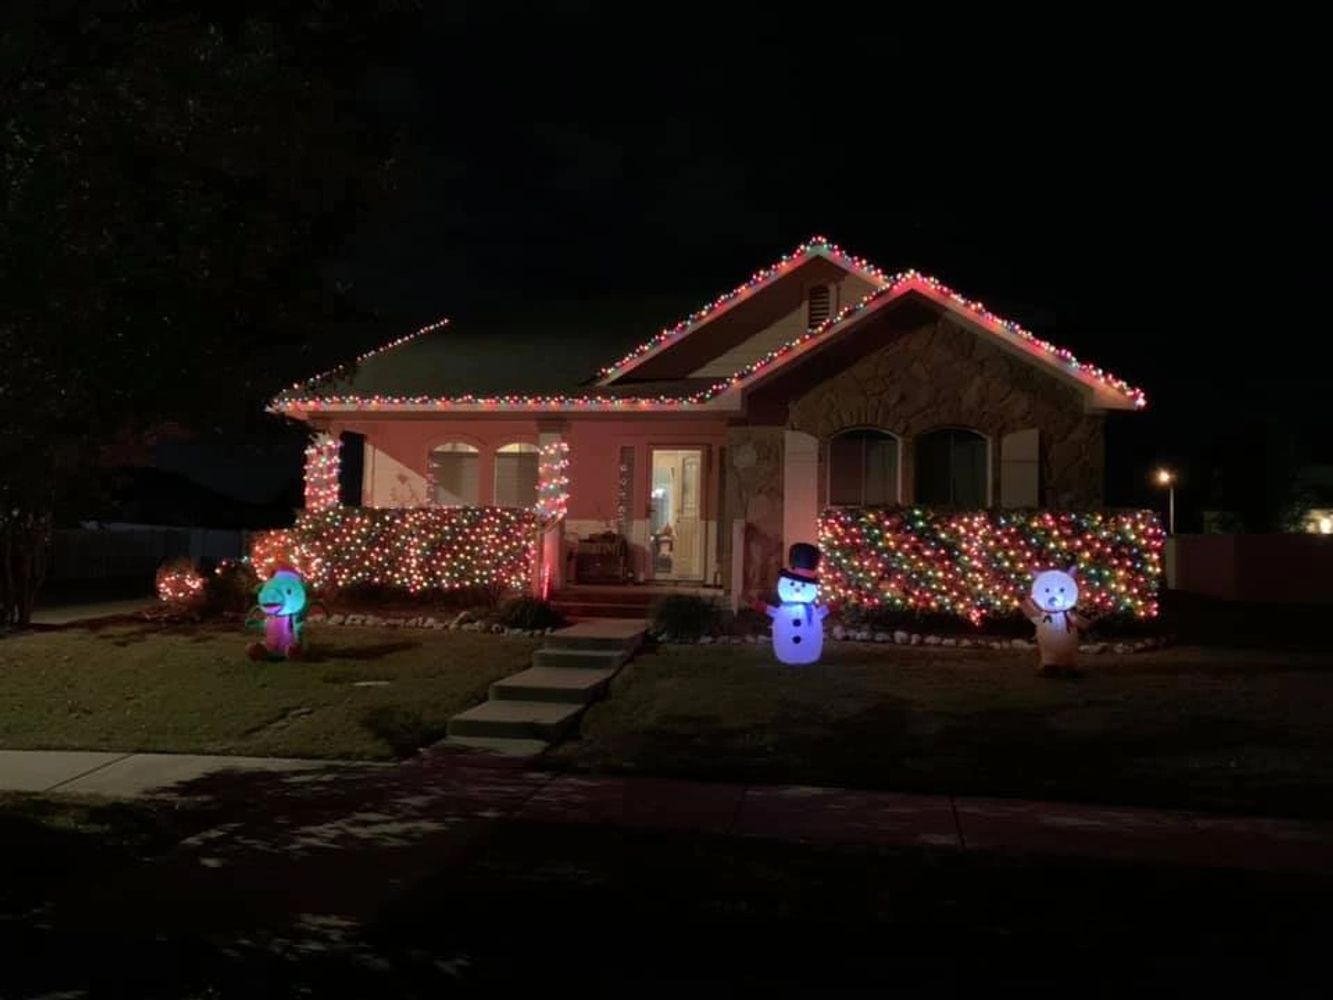 Call for your holiday lighting appointments.